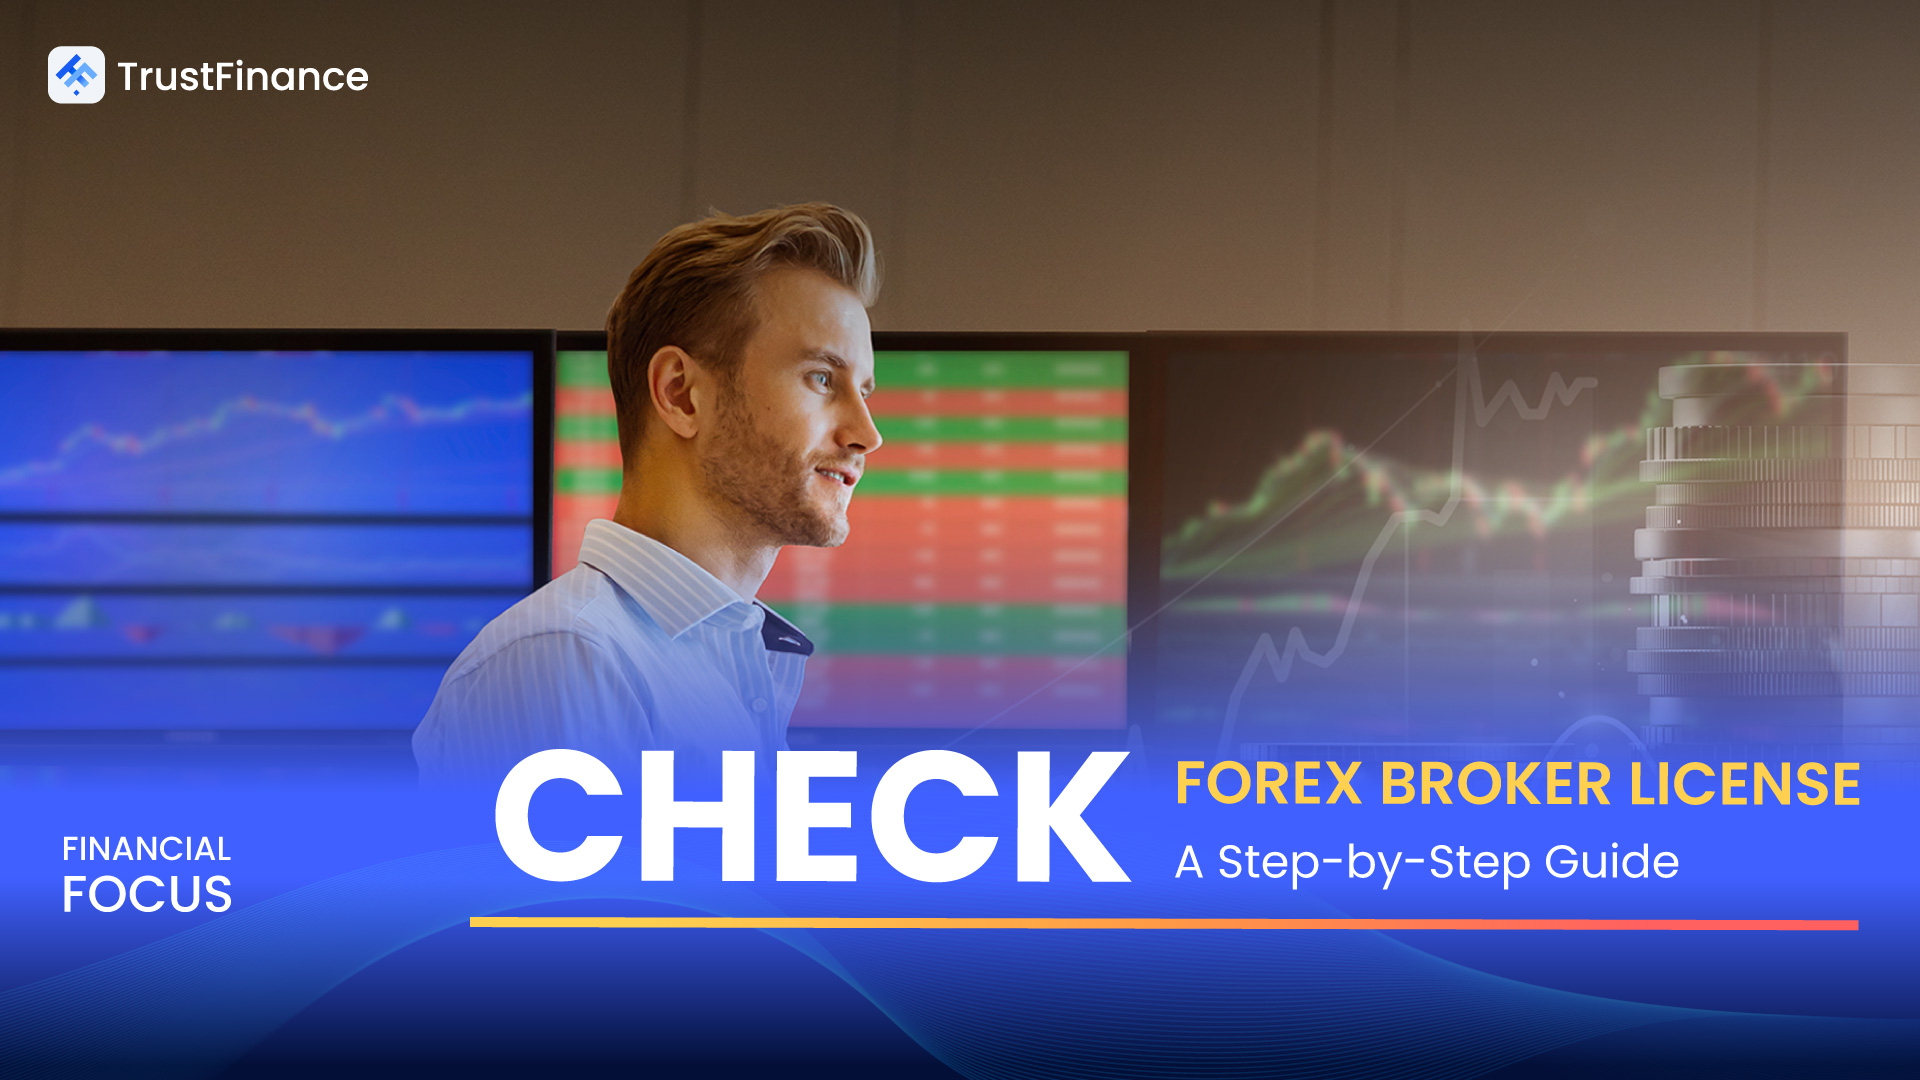 Check Forex Broker License: A Step-by-Step Guide